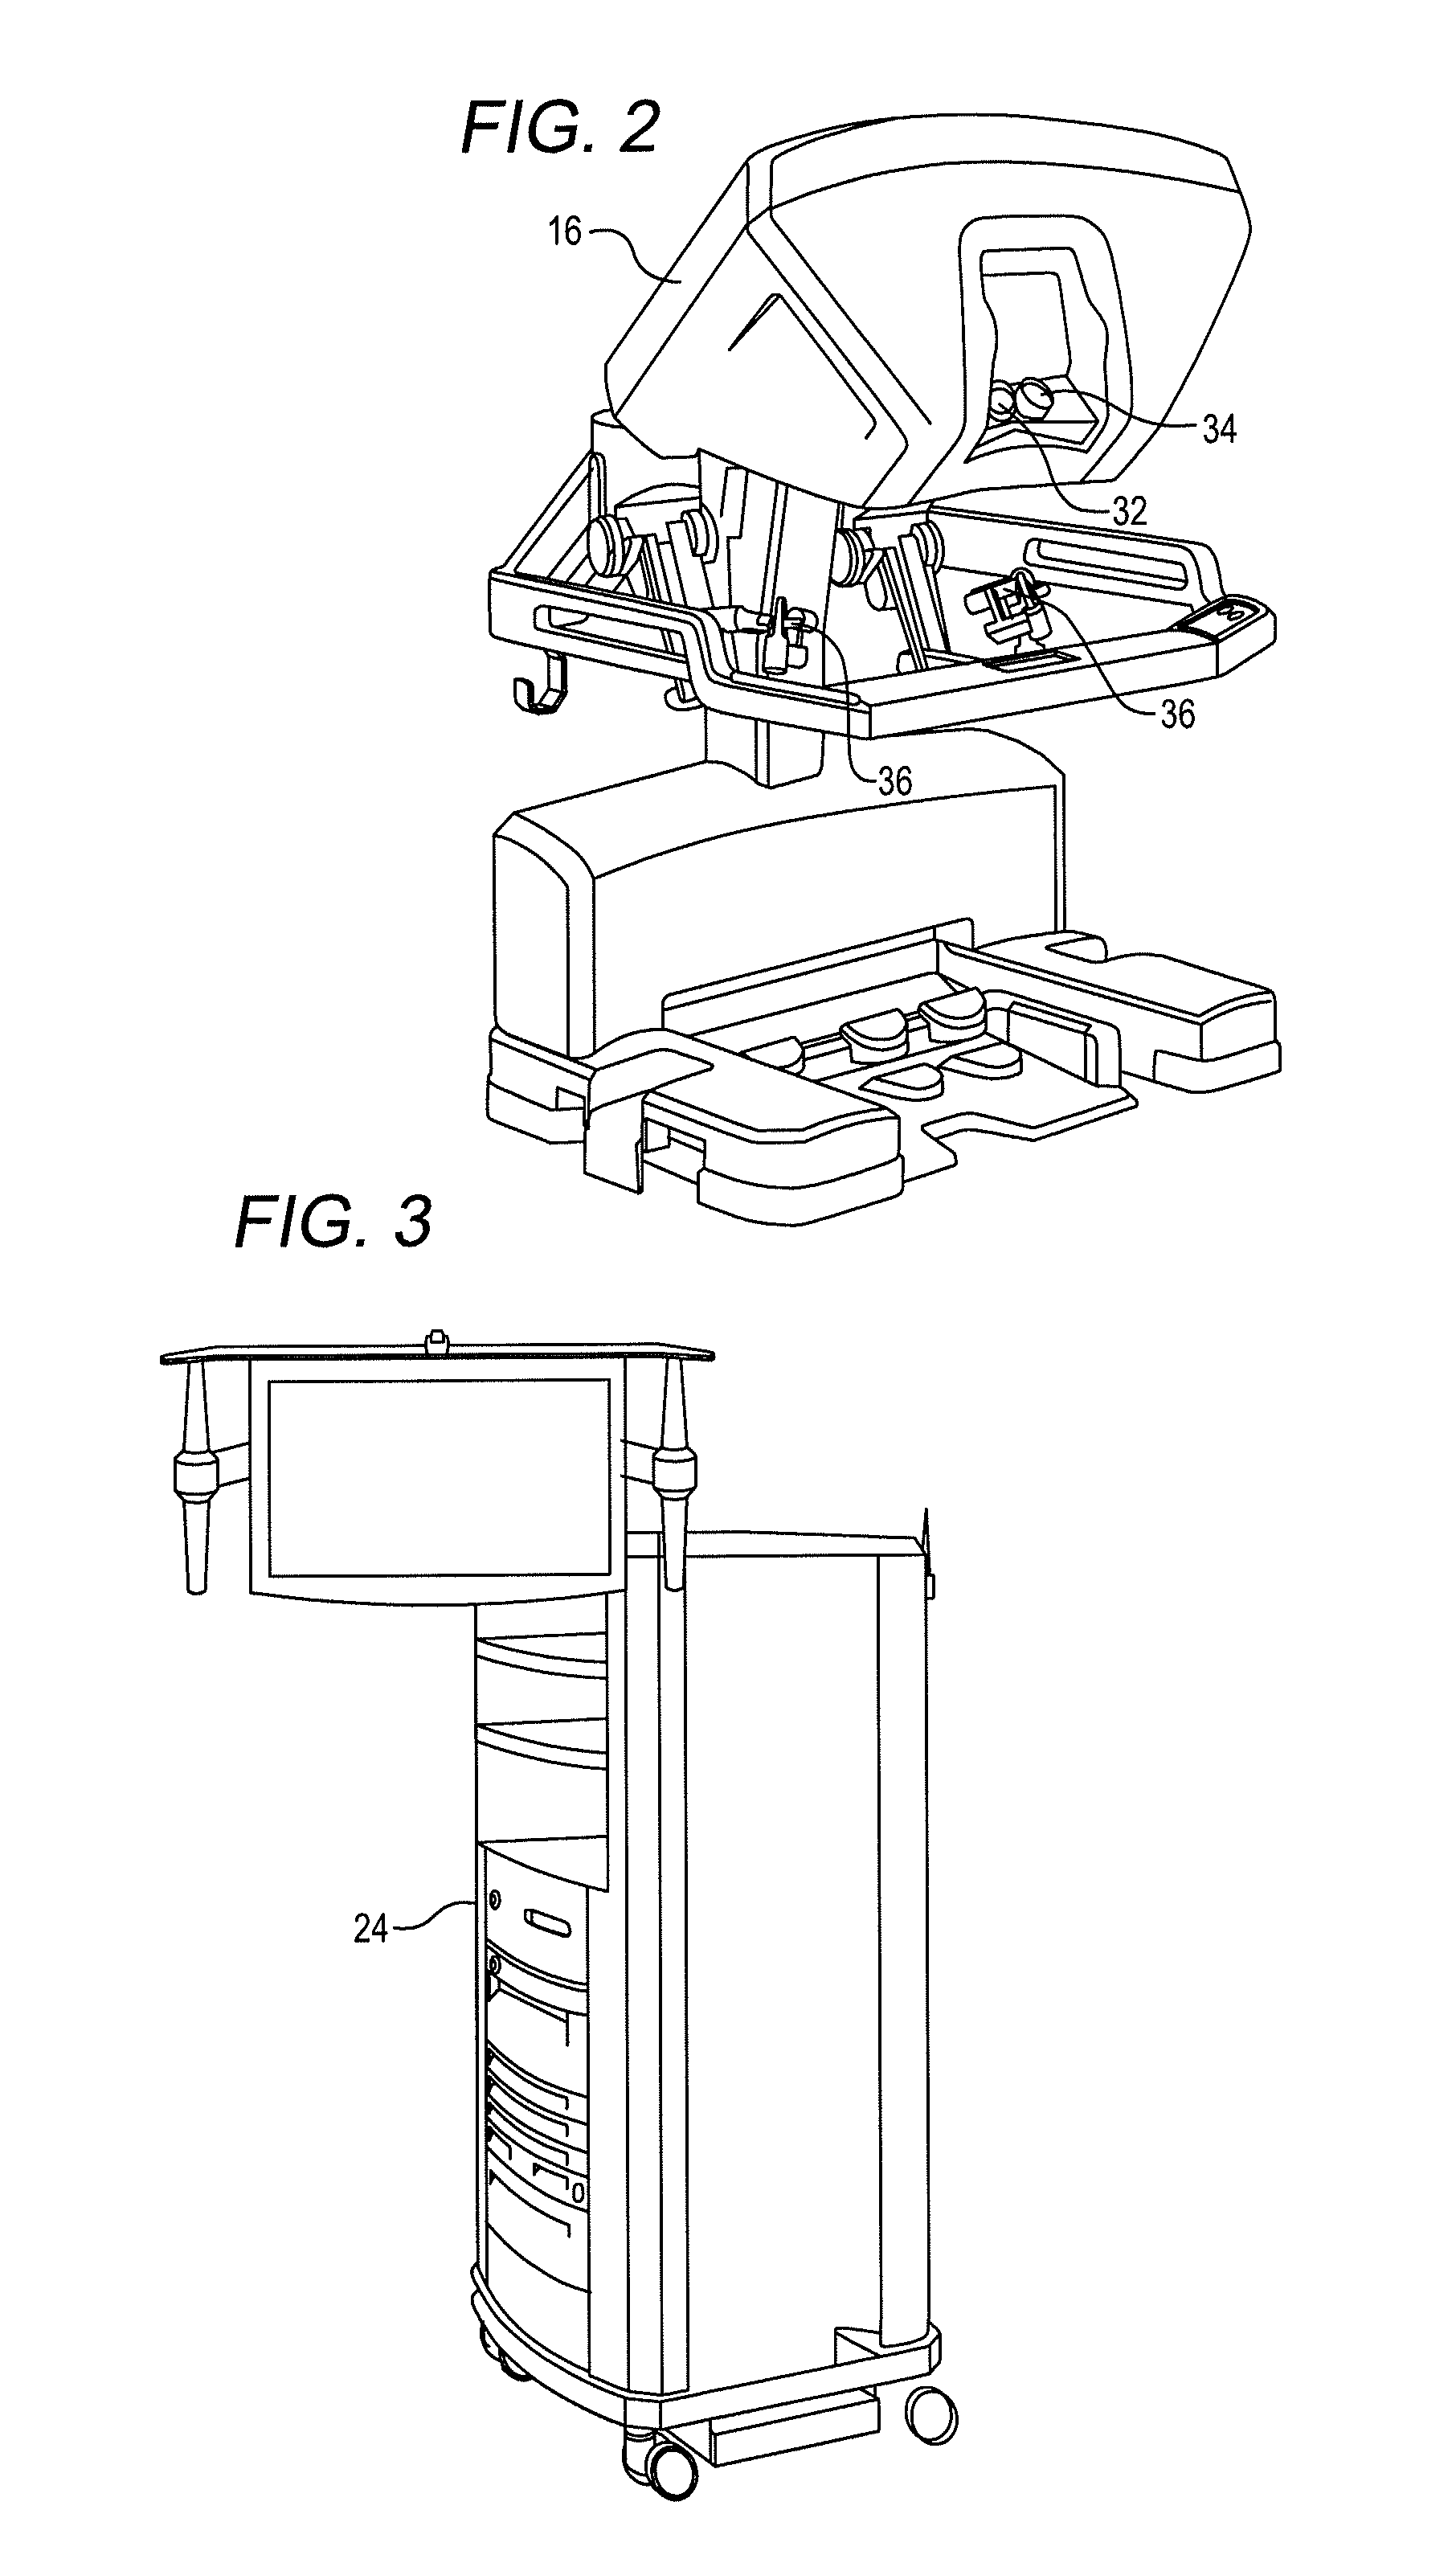 Surgical instrument with single drive input for two end effector mechanisms